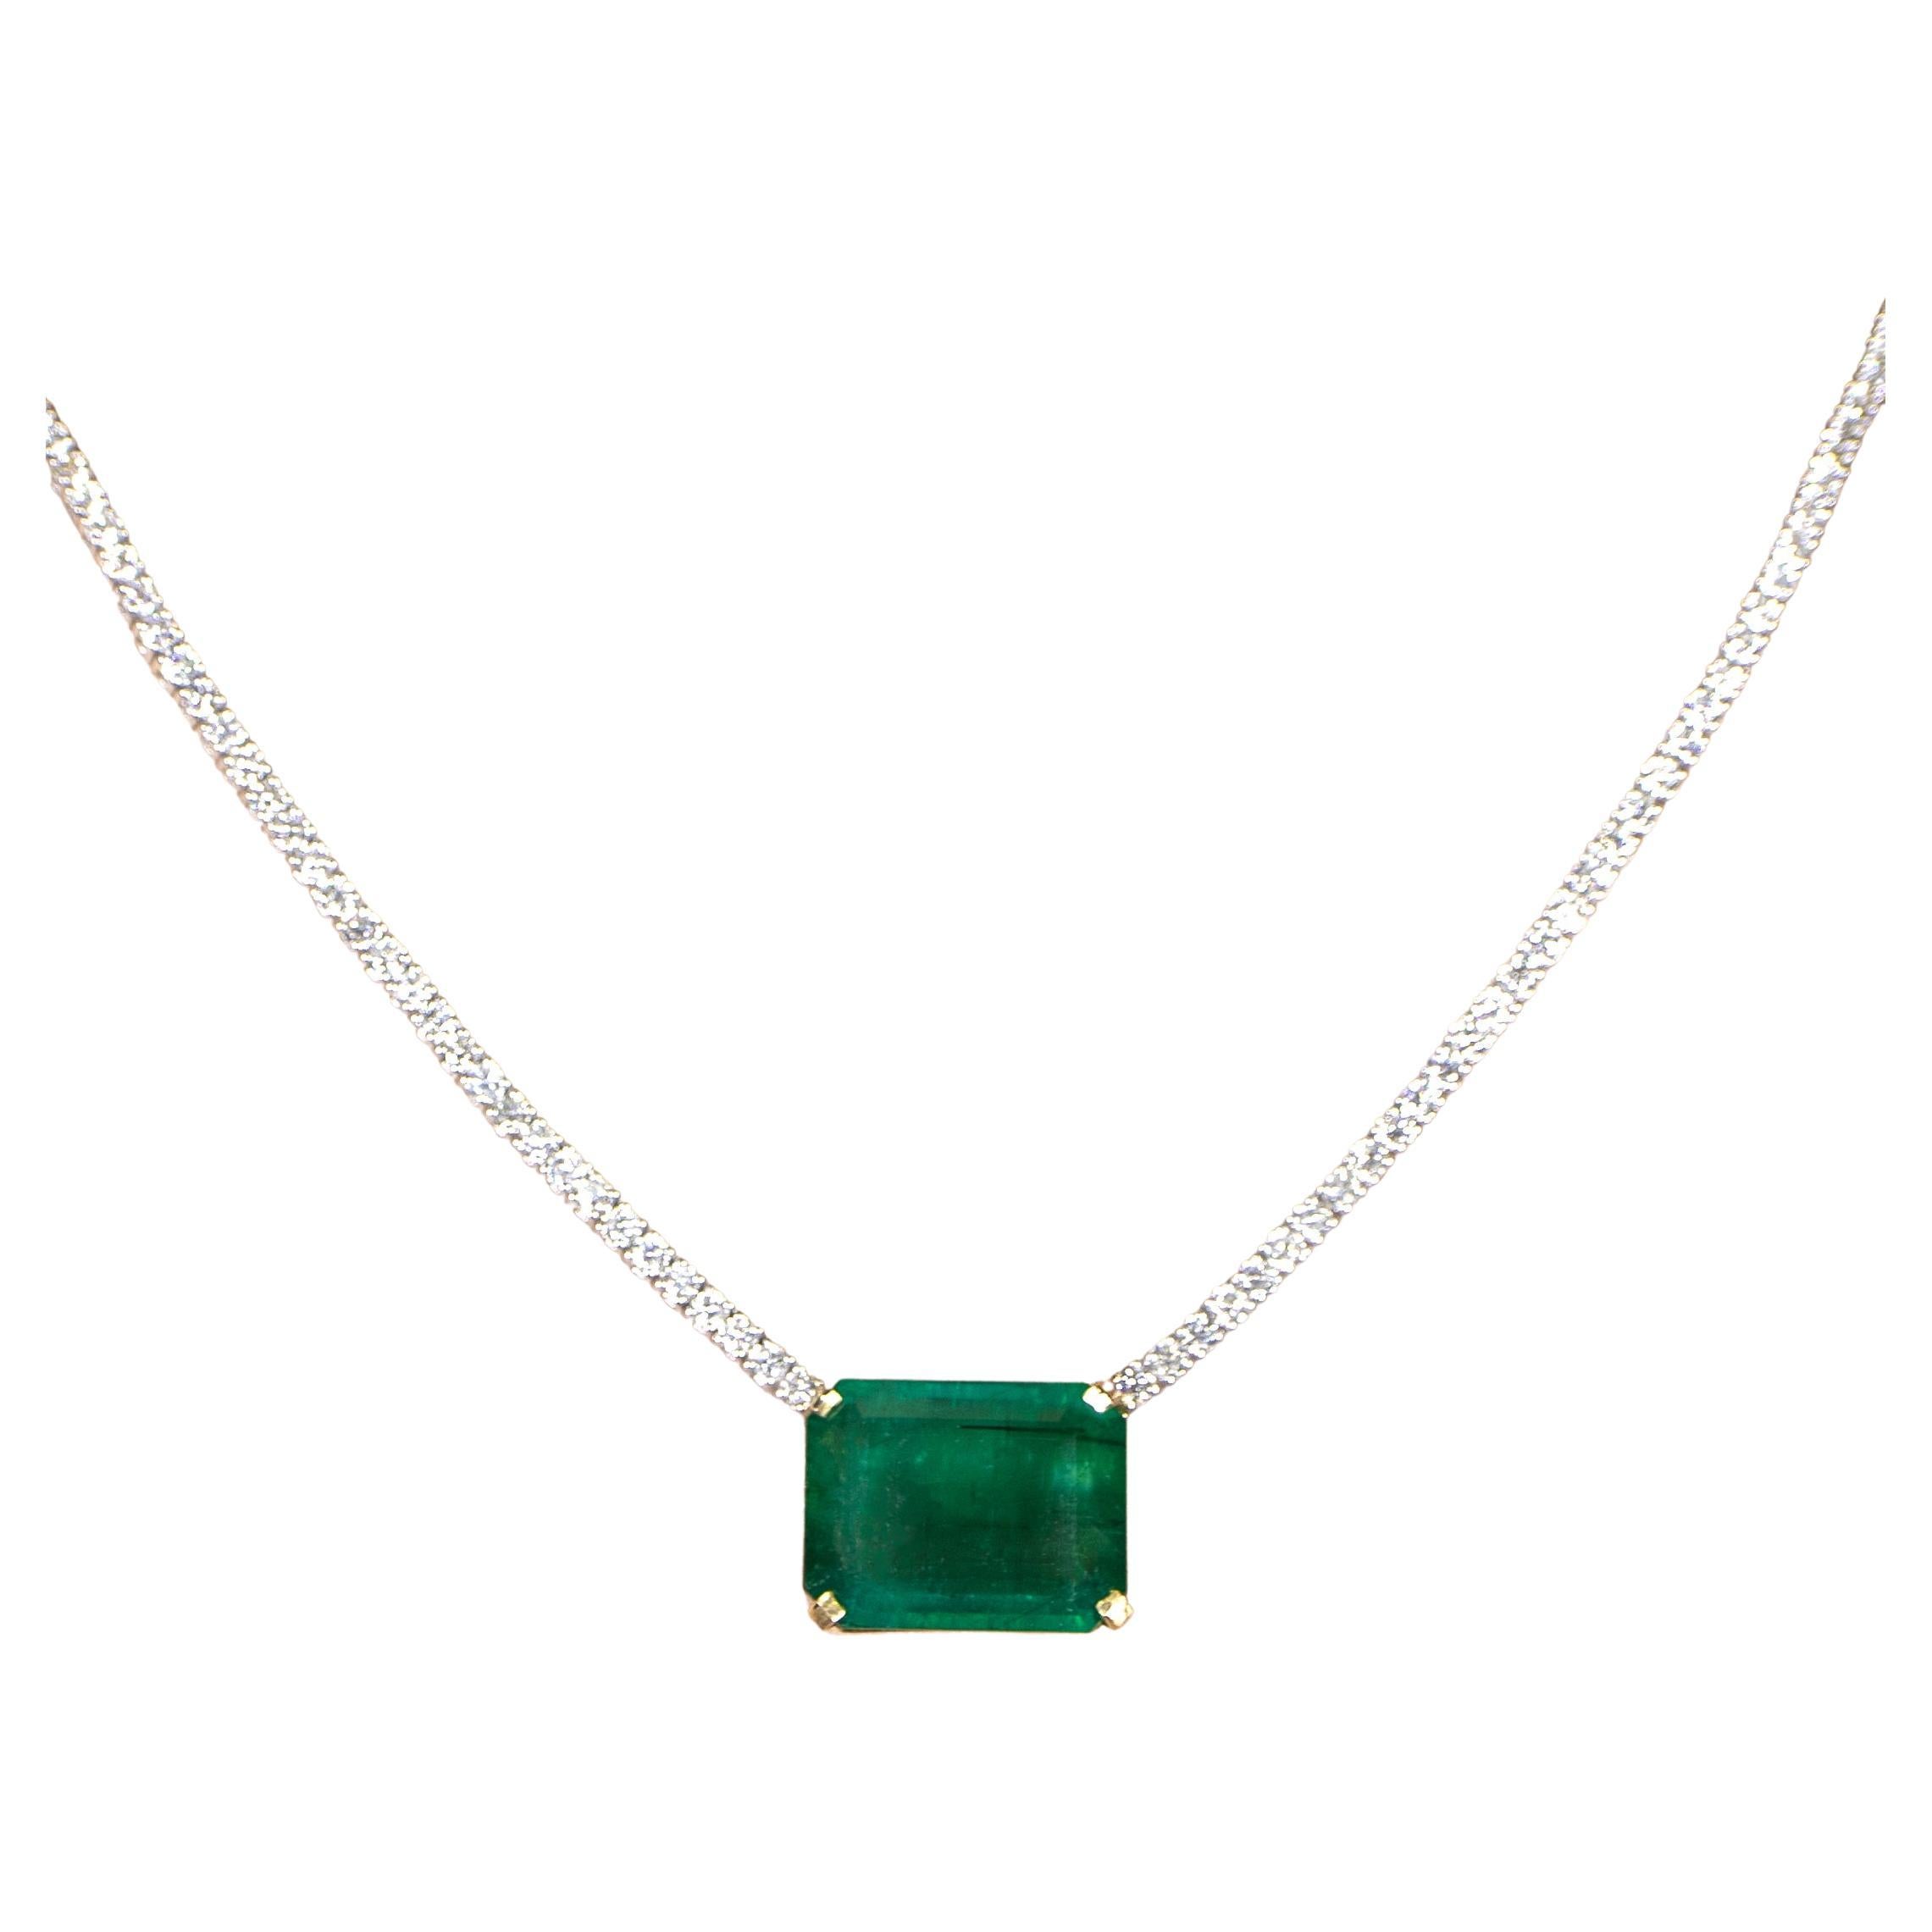 Important Emerald Pendant With Diamond Necklace 13.2 Carats 18K Gold For Sale